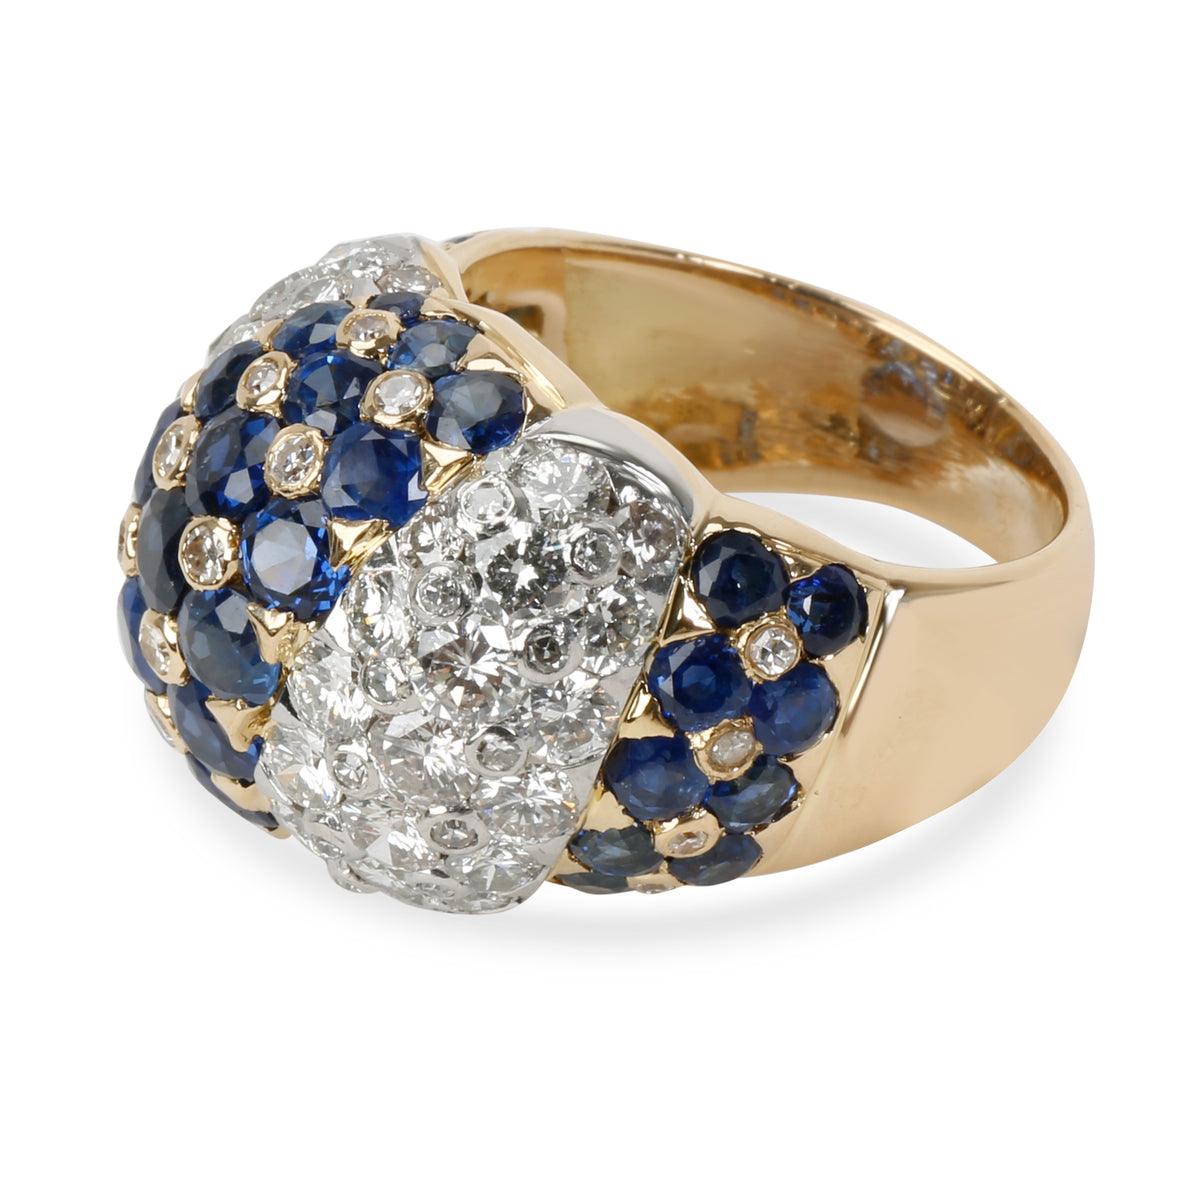 Vintage Tiffany & Co. Domed Diamond Sapphire Ring in 18K Yellow Gold 2.5 CTW